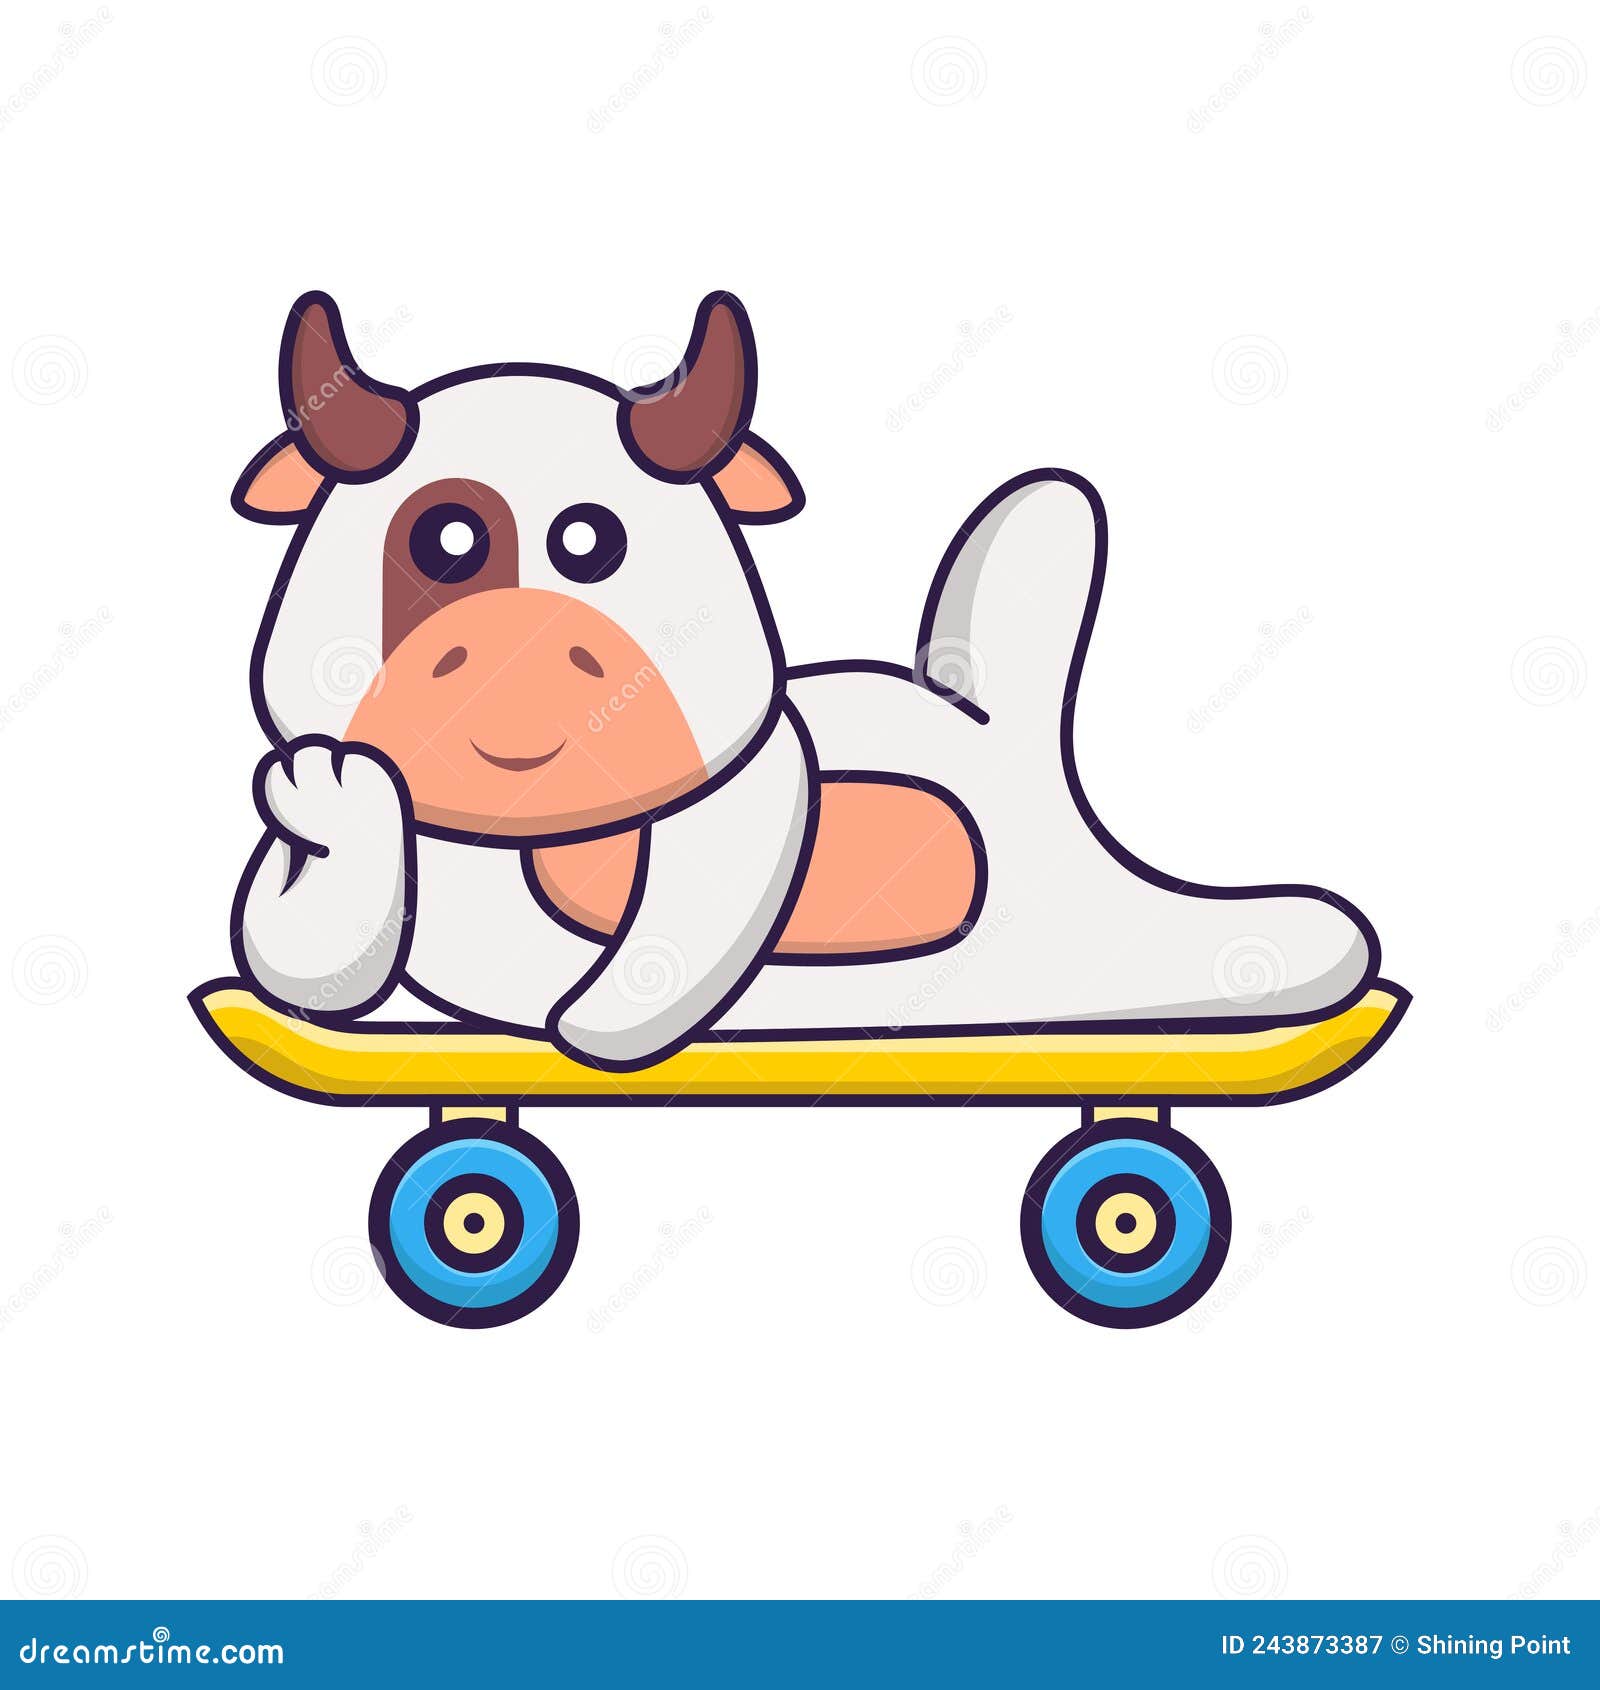 Cow Skateboard Stock Illustrations – 47 Cow Skateboard Stock Illustrations,  Vectors & Clipart - Dreamstime